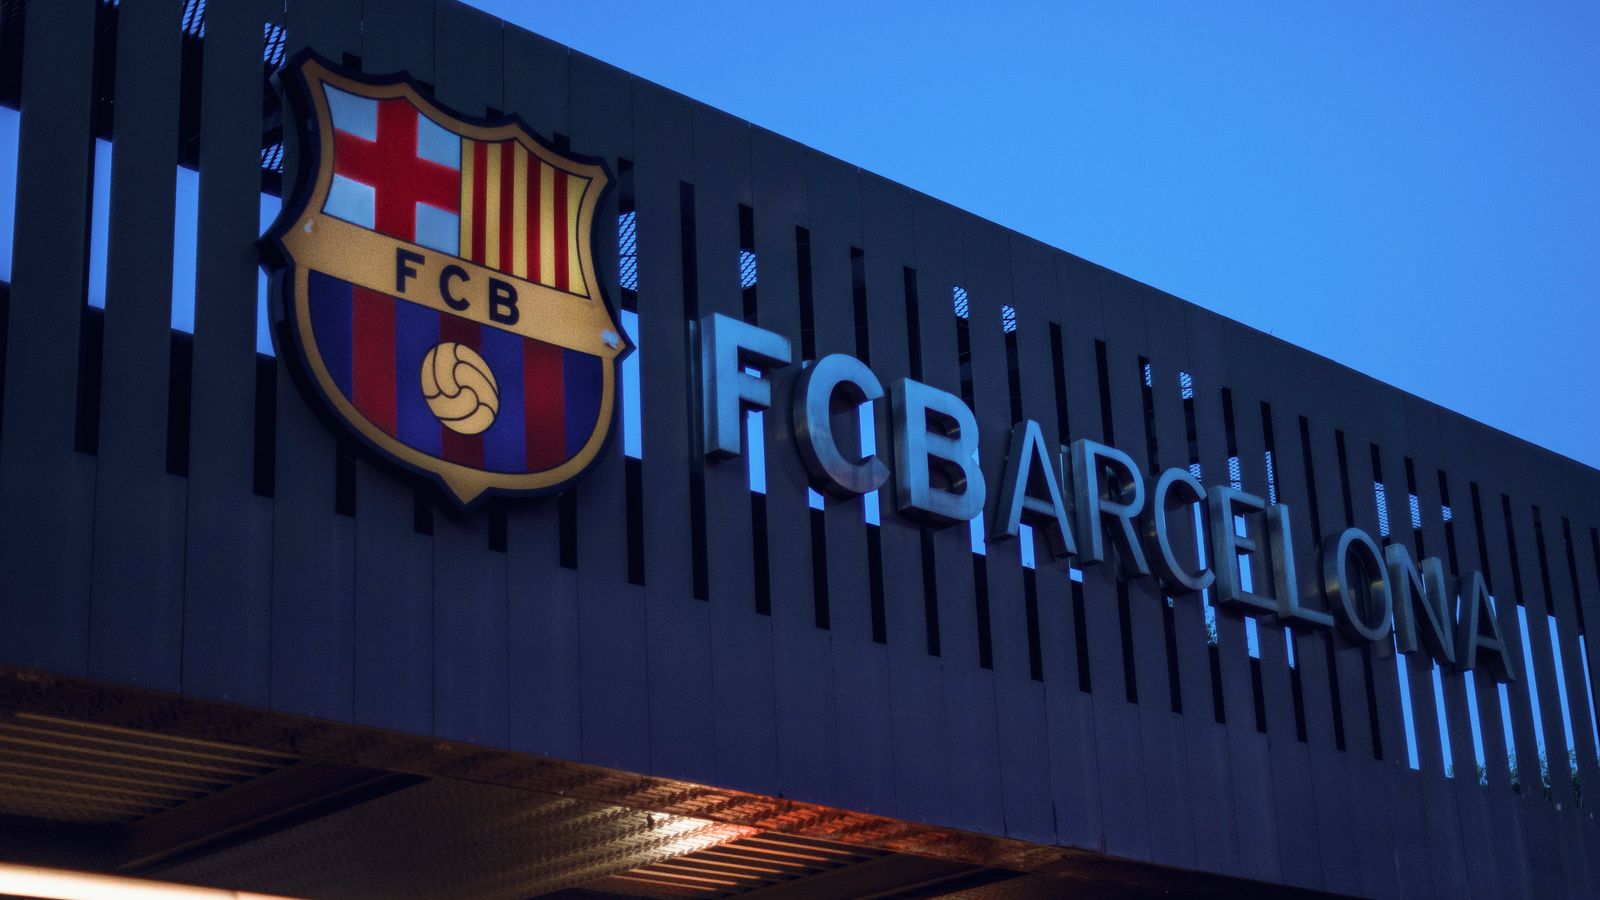 Barcelona join Real Madrid in rejecting La Ligas proposed CVC investment Football News Sky Sports